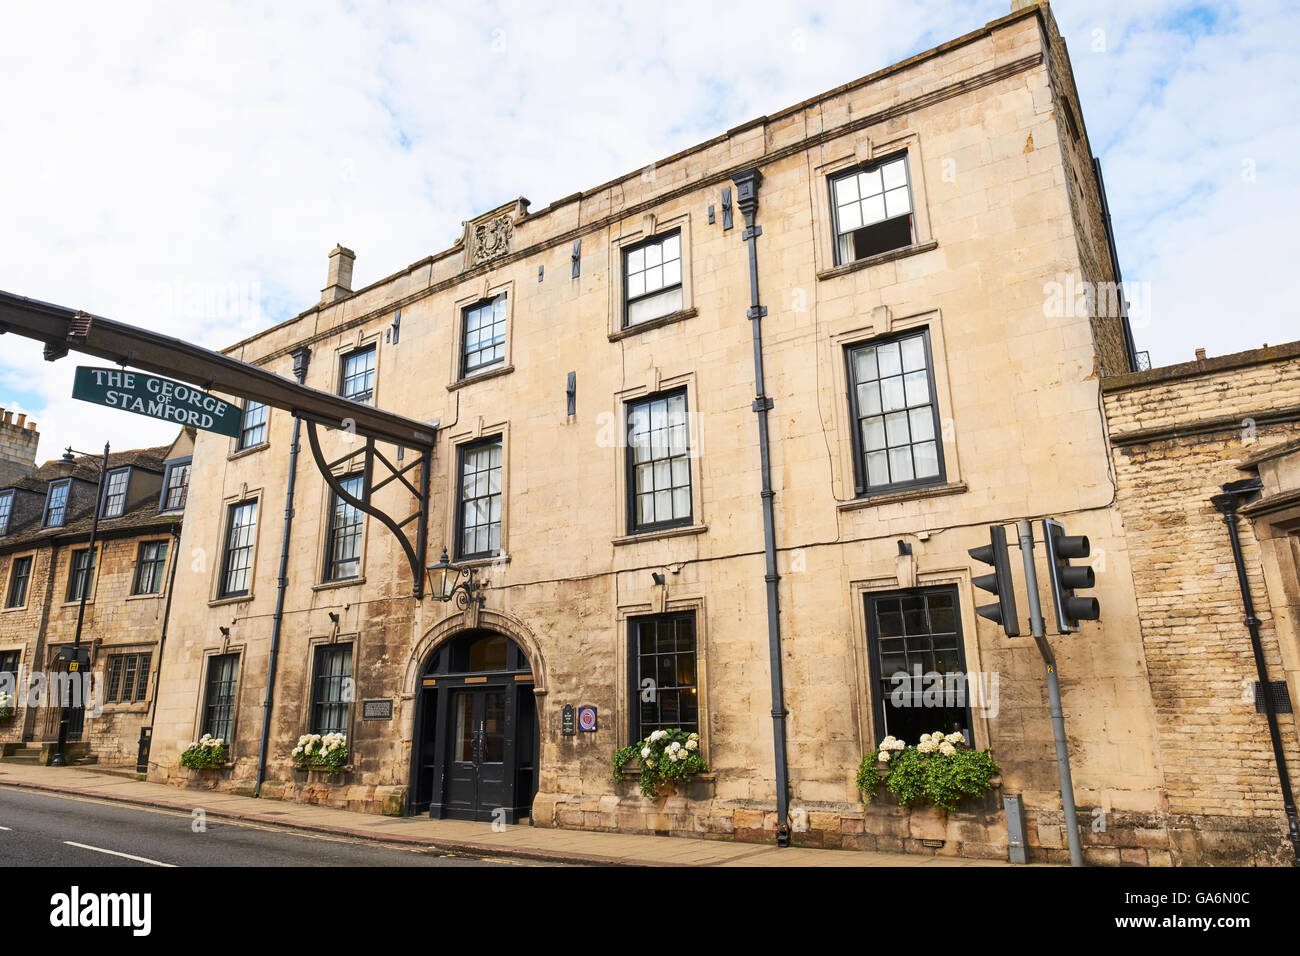 The George Hotel St Martin's Stamford Lincolnshire UK Stock Photo